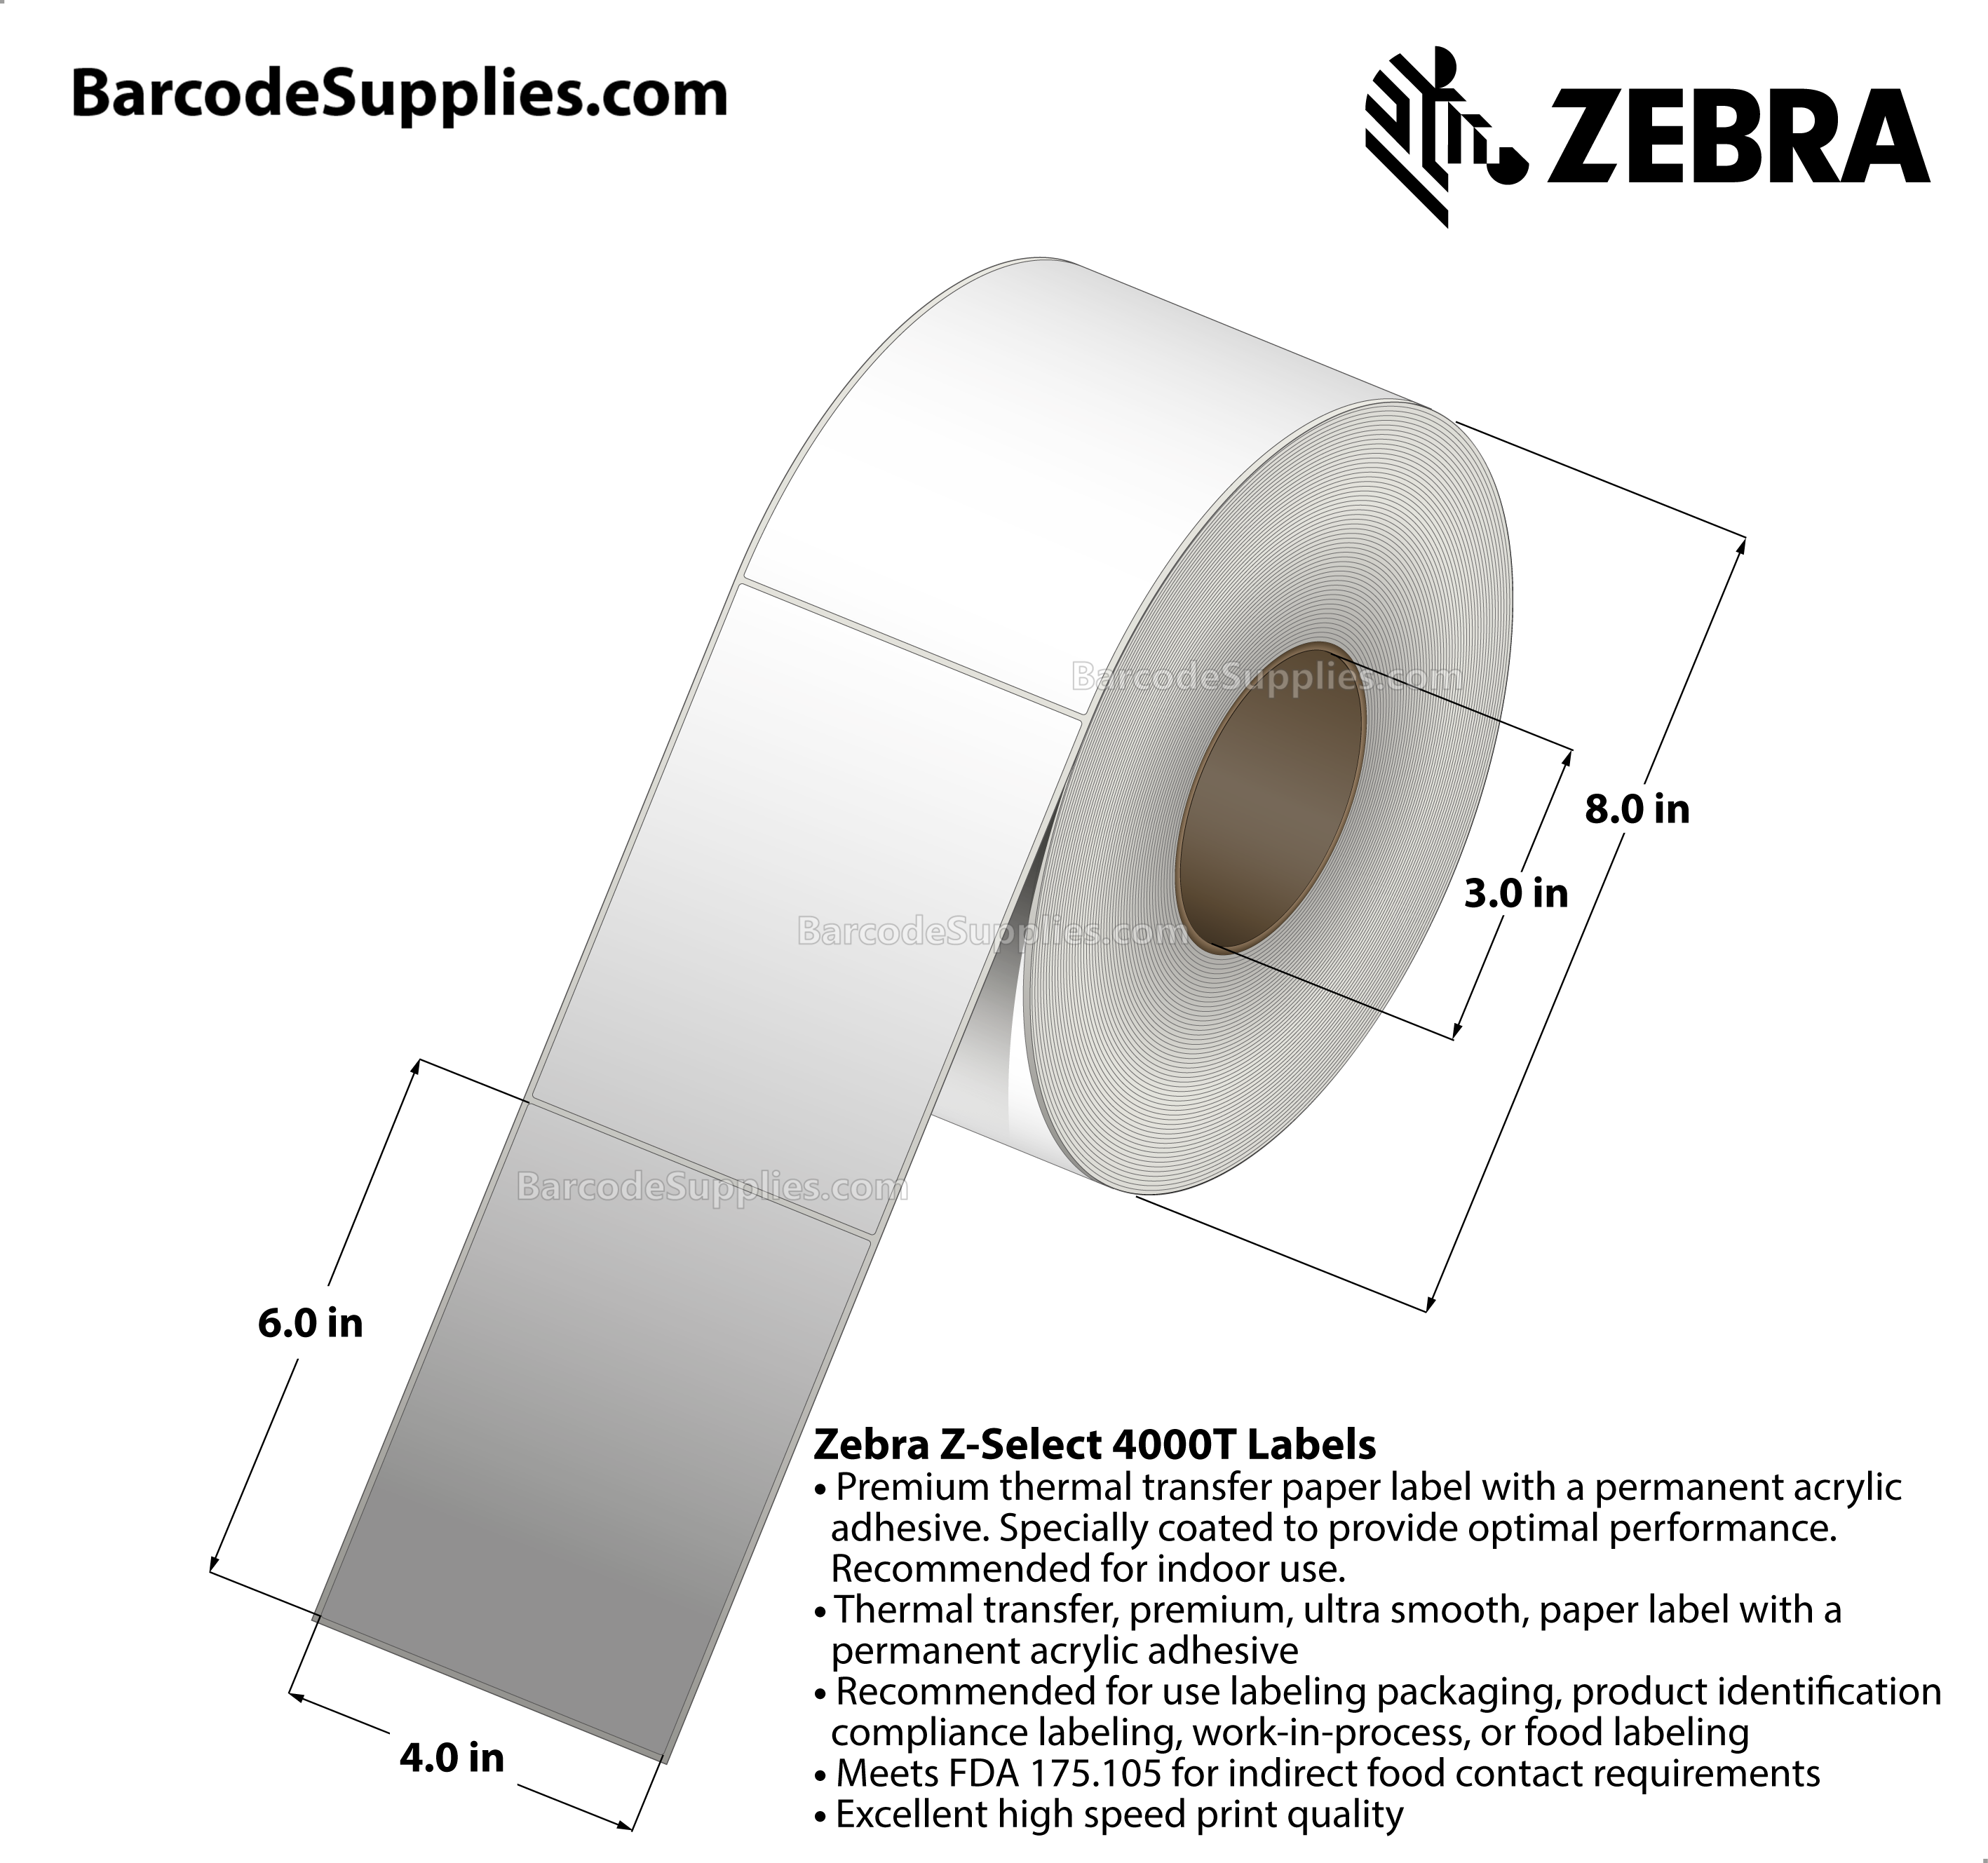 4 x 6 Thermal Transfer White Z-Select 4000T Labels With Permanent Adhesive - Not Perforated - 950 Labels Per Roll - Carton Of 4 Rolls - 3800 Labels Total - MPN: 72353